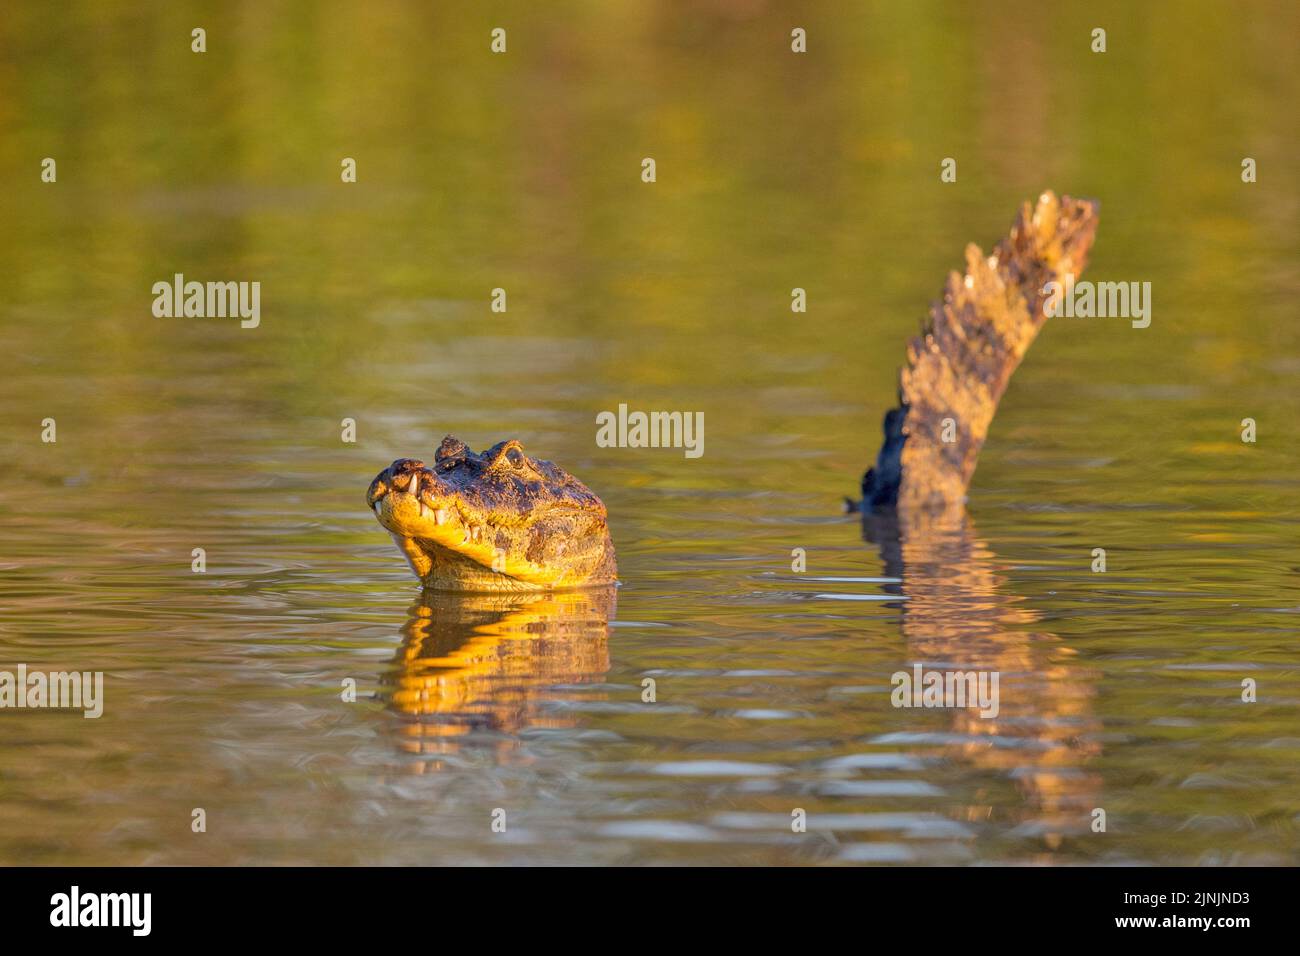 spectacled caiman (Caiman crocodilus), swimming in water, Brazil, Pantanal Stock Photo